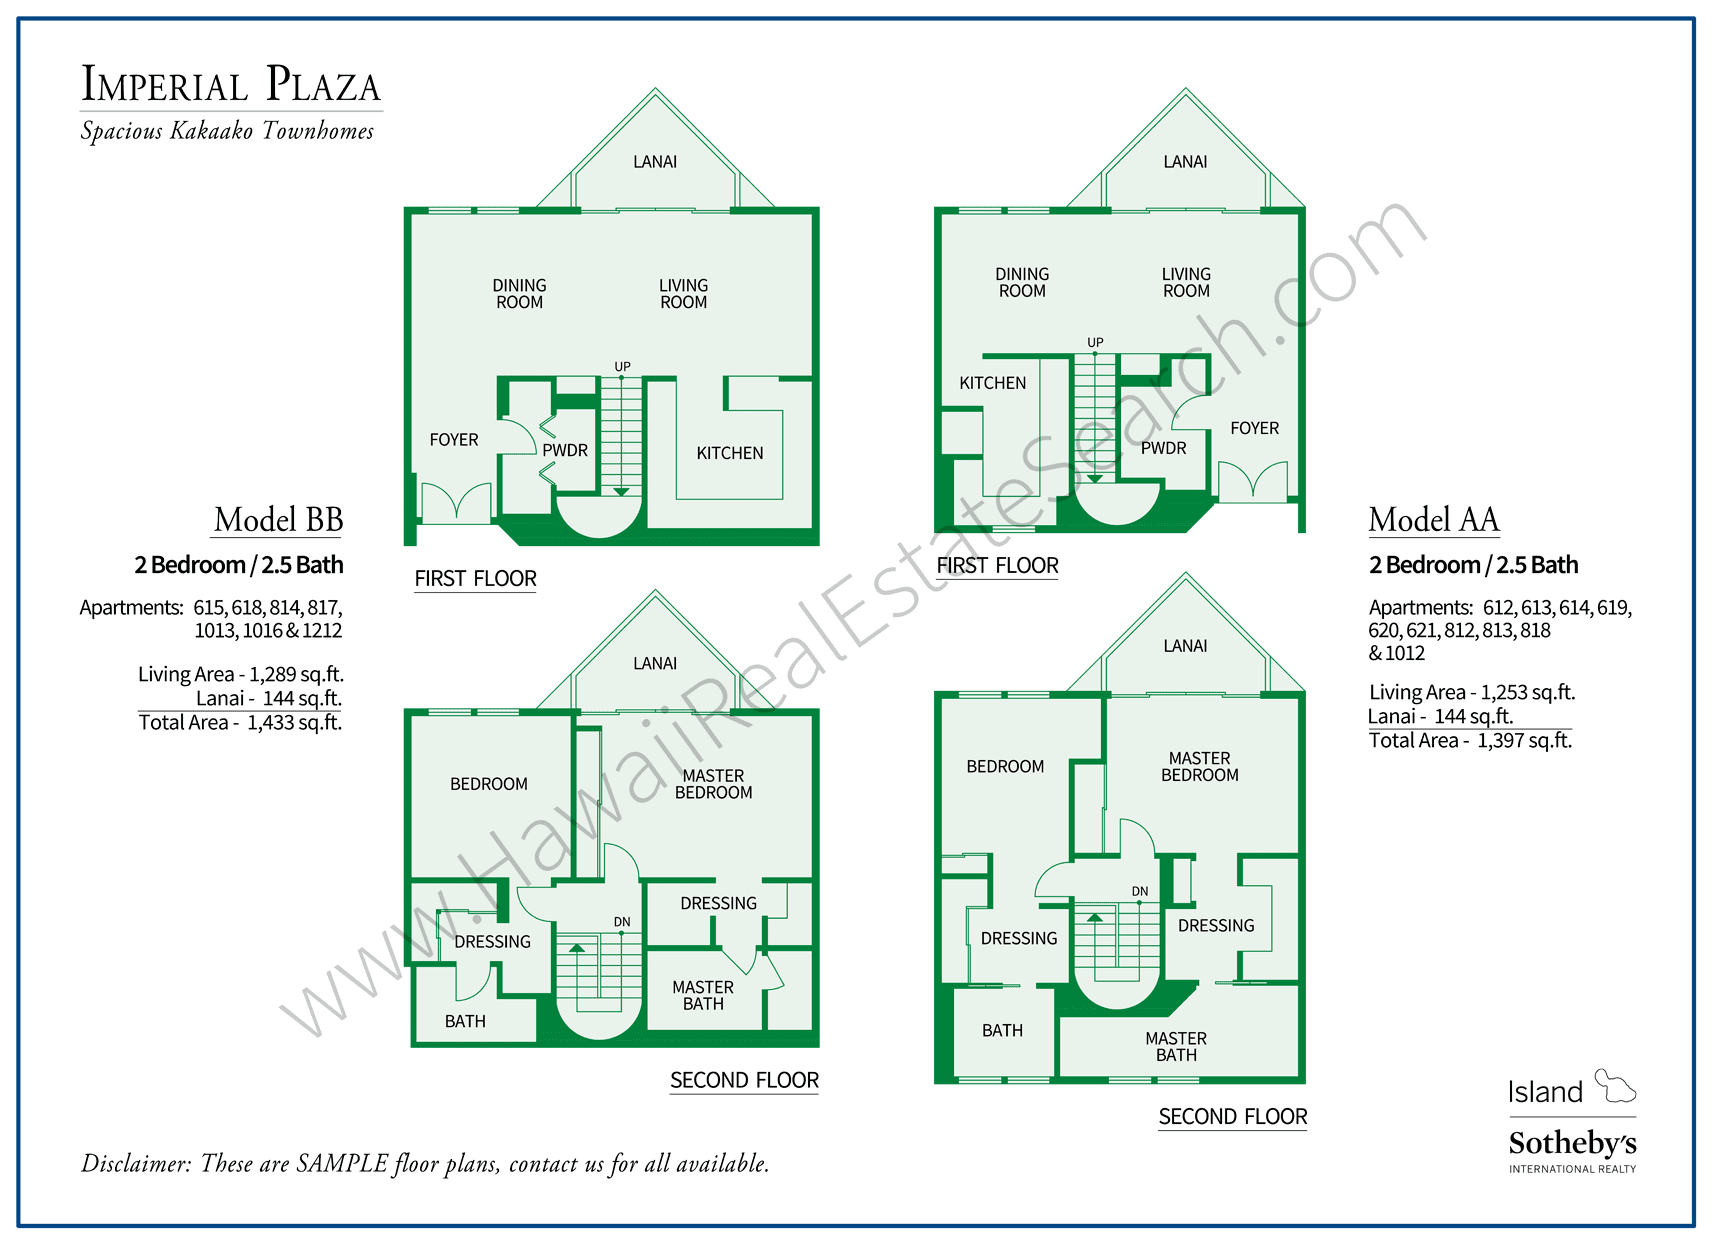 Imperial Plaza Floor Plan AA and BB